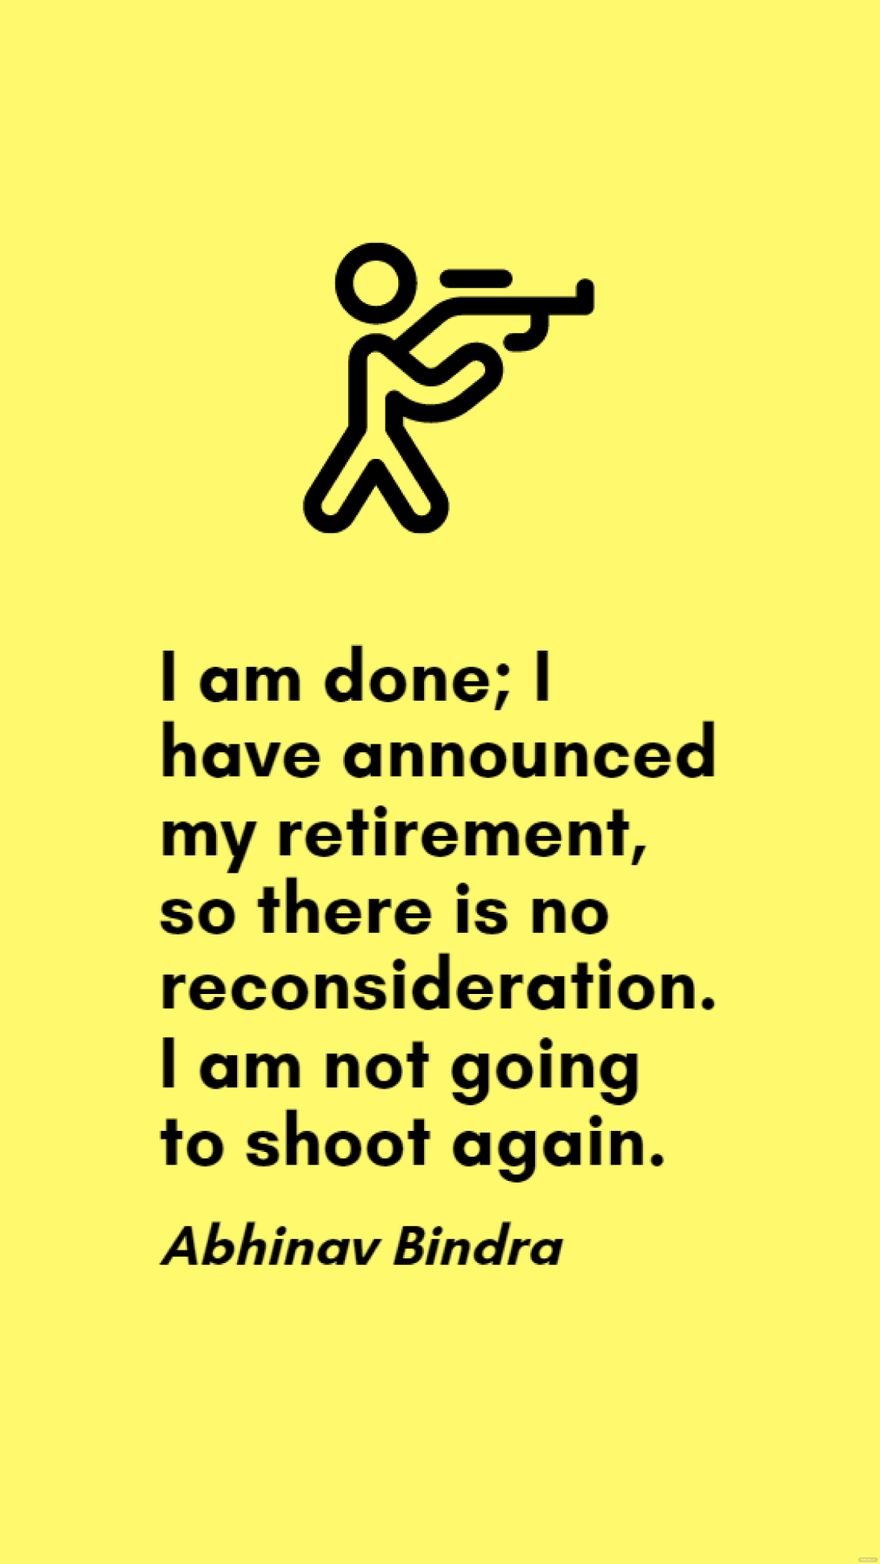 Abhinav Bindra - I am done; I have announced my retirement, so there is no reconsideration. I am not going to shoot again.